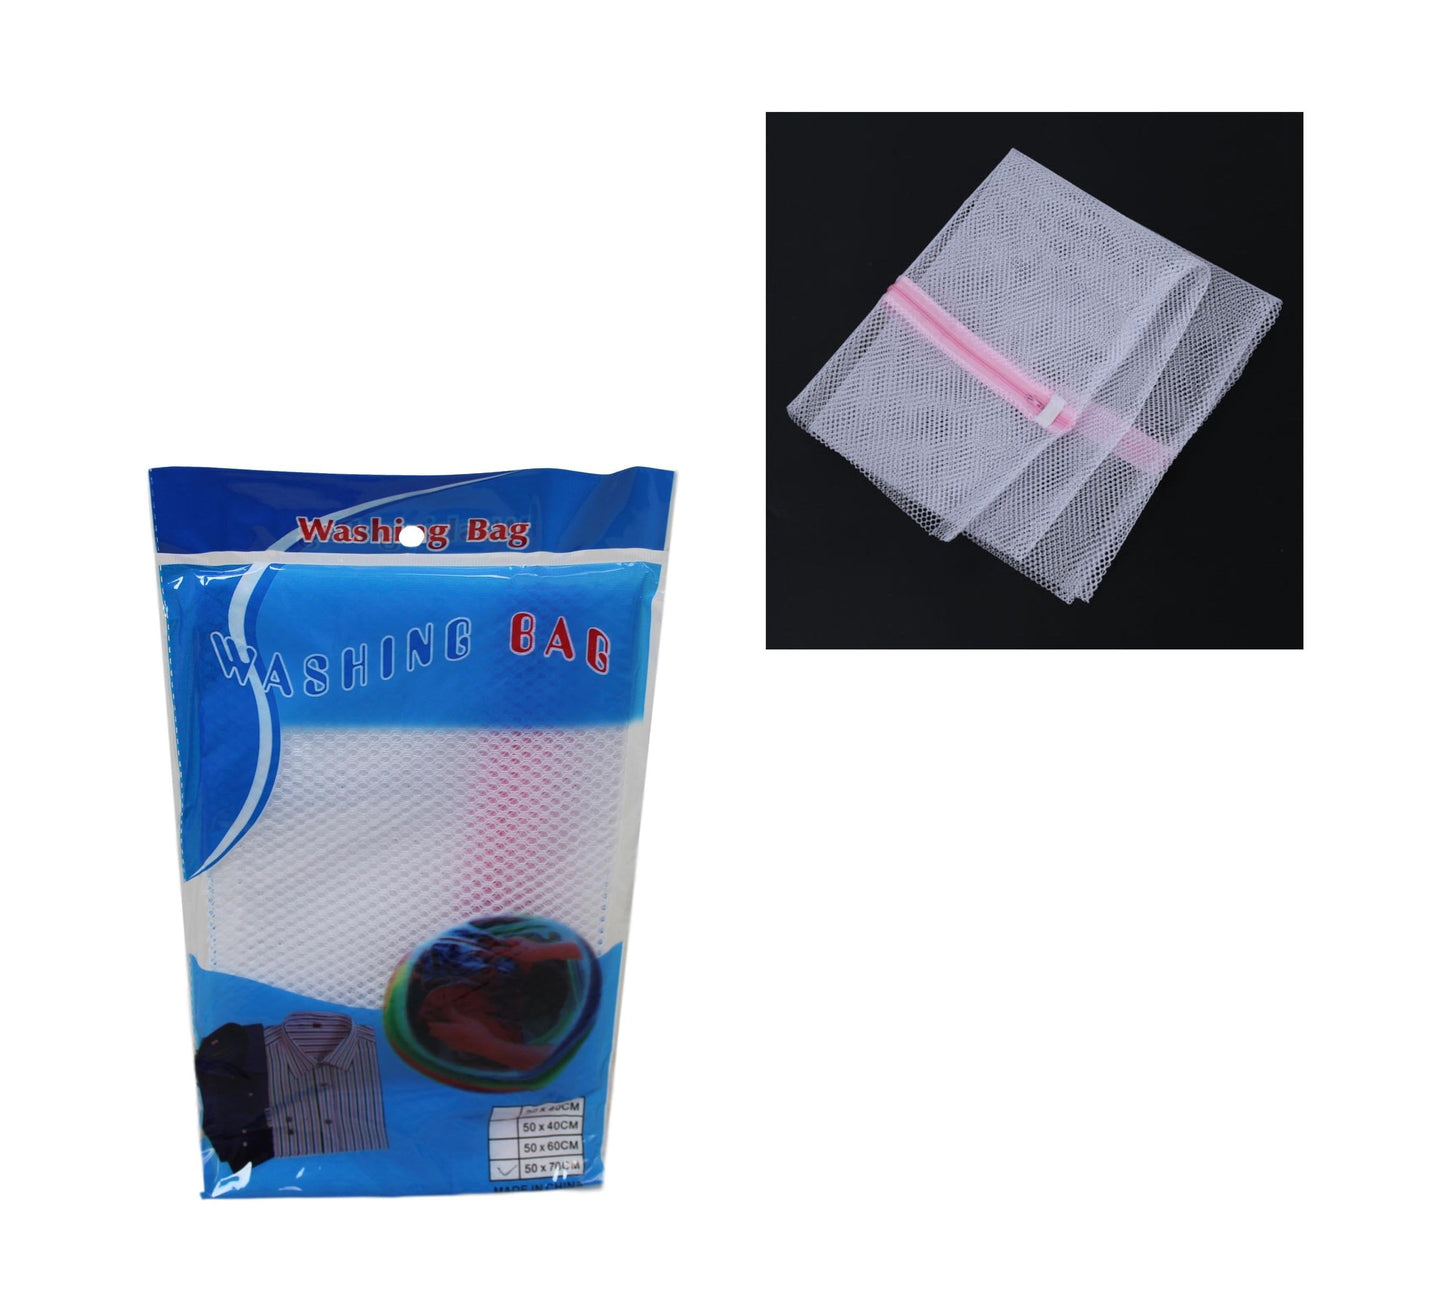 Zipped Wash Bags Laundry Mesh Net Home Protective Laundry Bag 50cm x 70cm 6088 (Large Letter Rate)